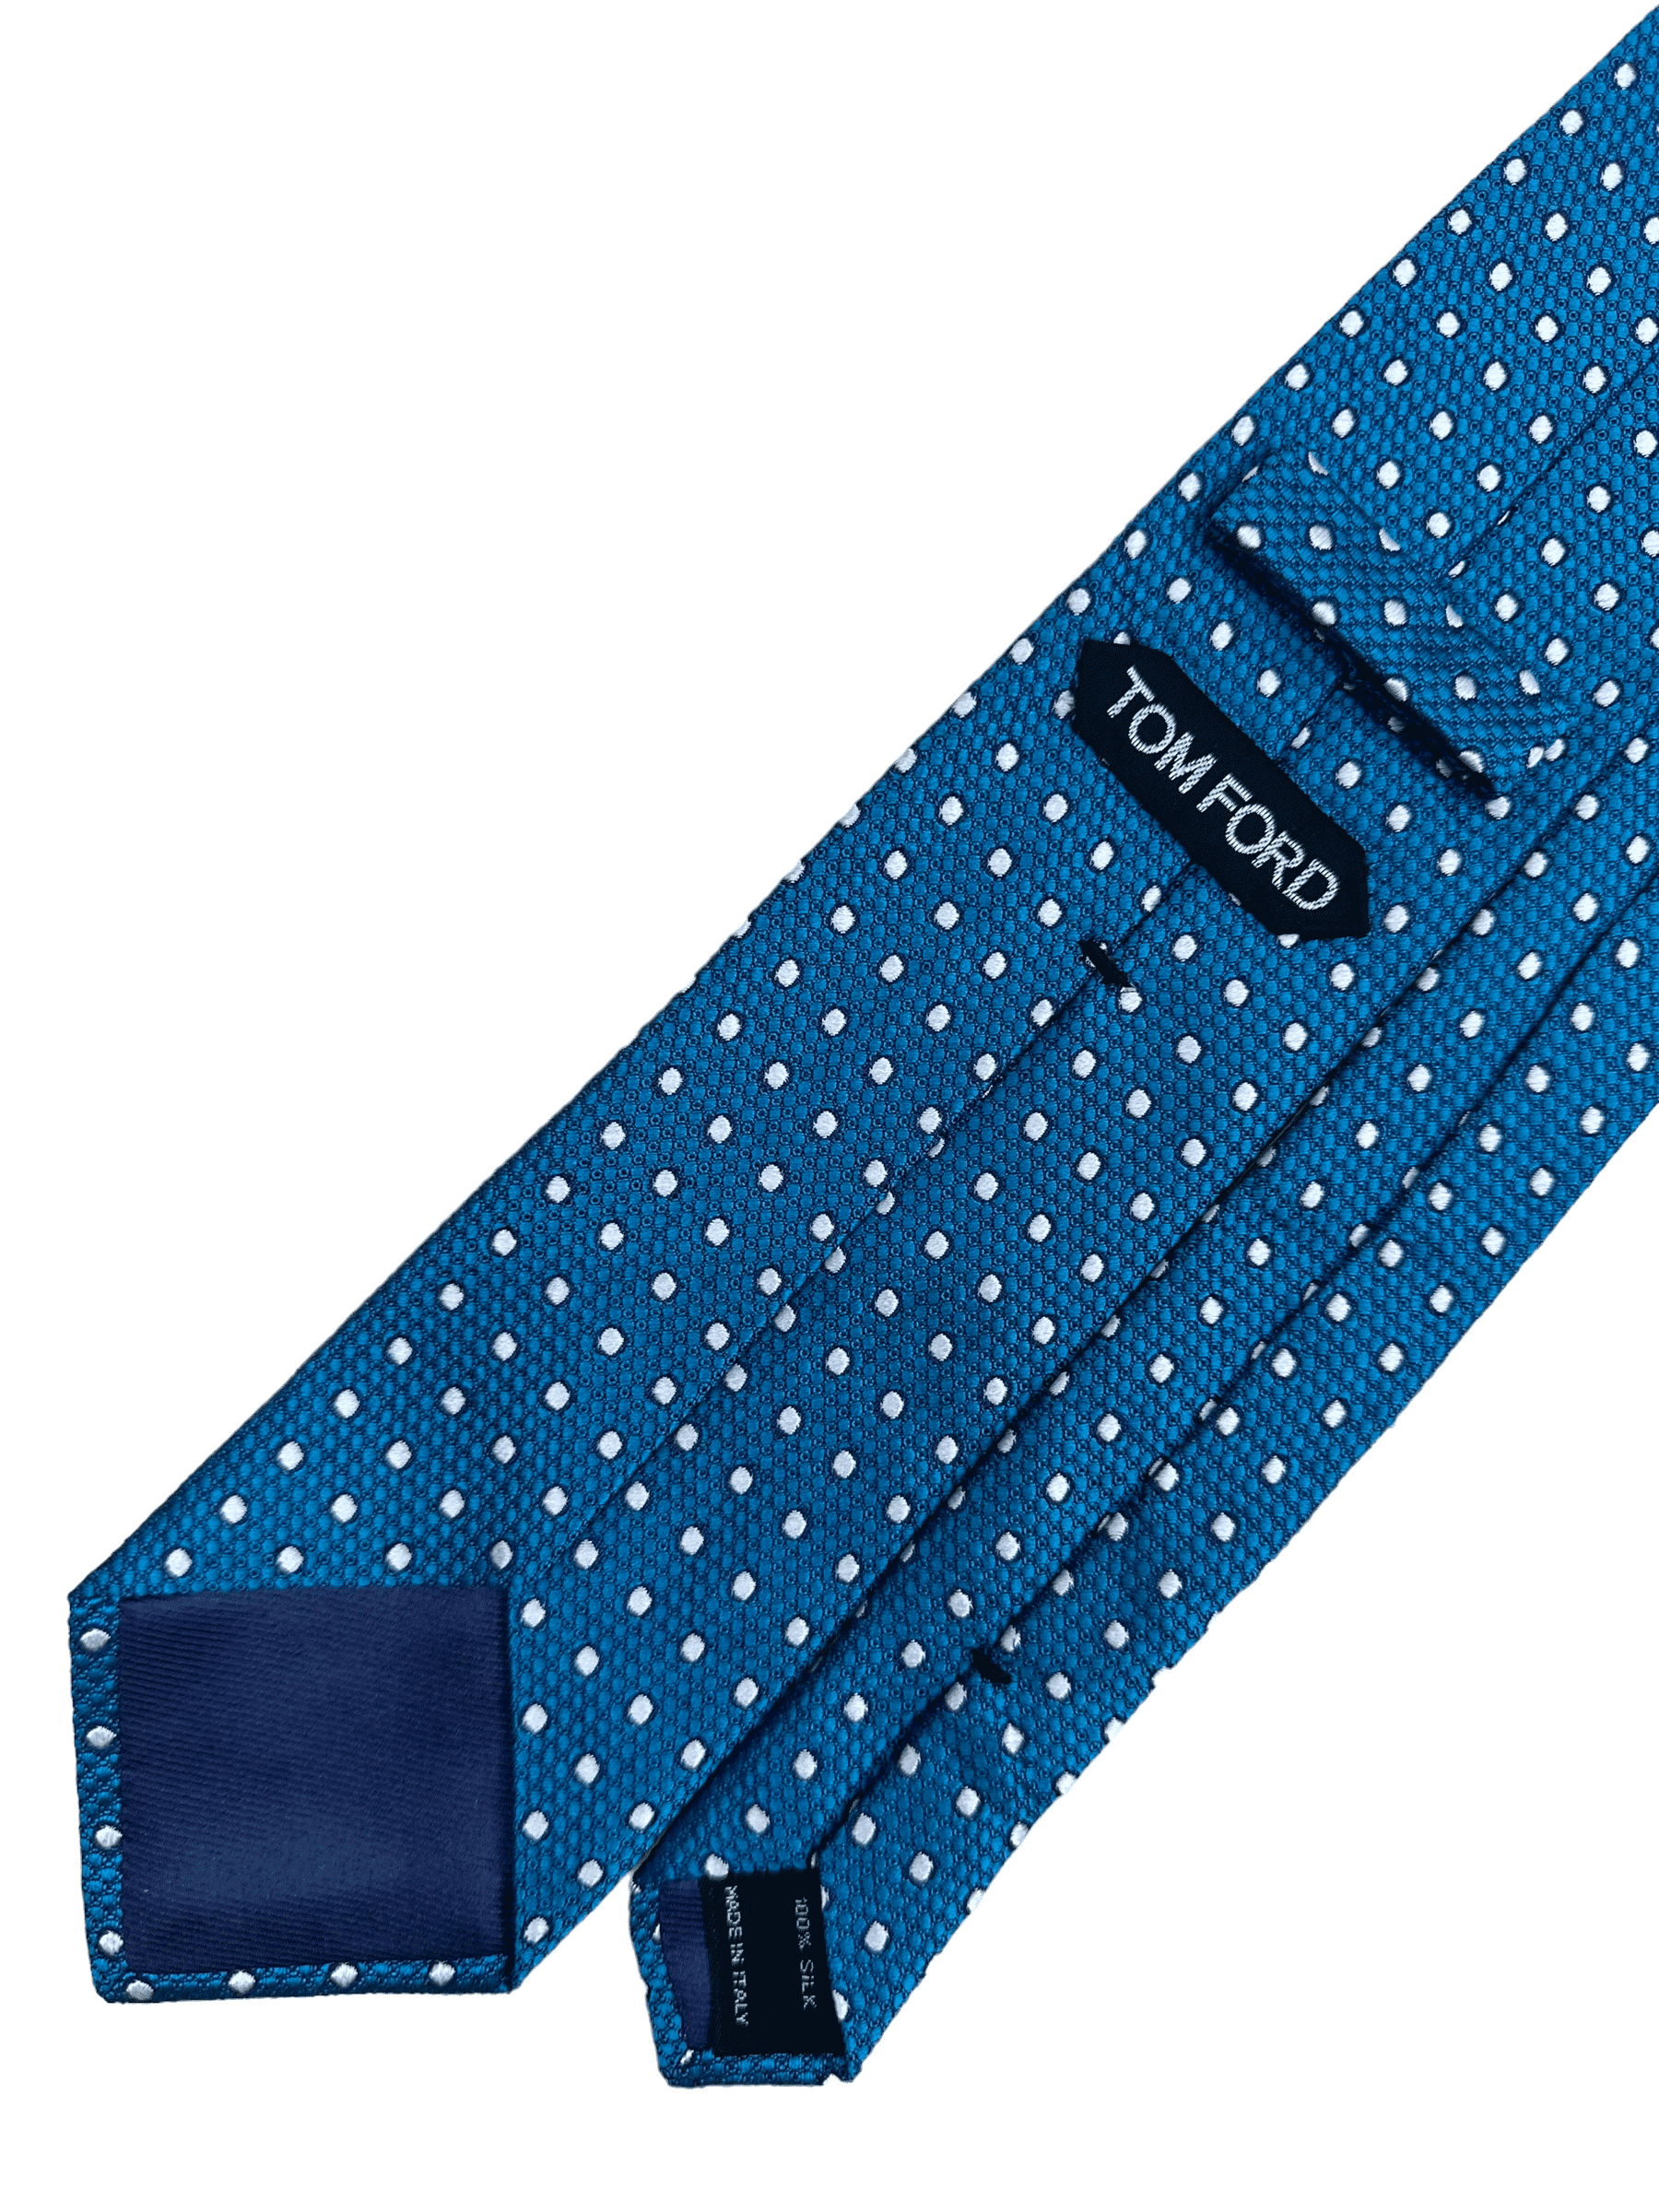 Tom Ford Teal Blue Polka Dot Silk Tie - Genuine Design luxury consignment Calgary, Alberta, Canada New & pre-owned clothing, shoes, accessories.